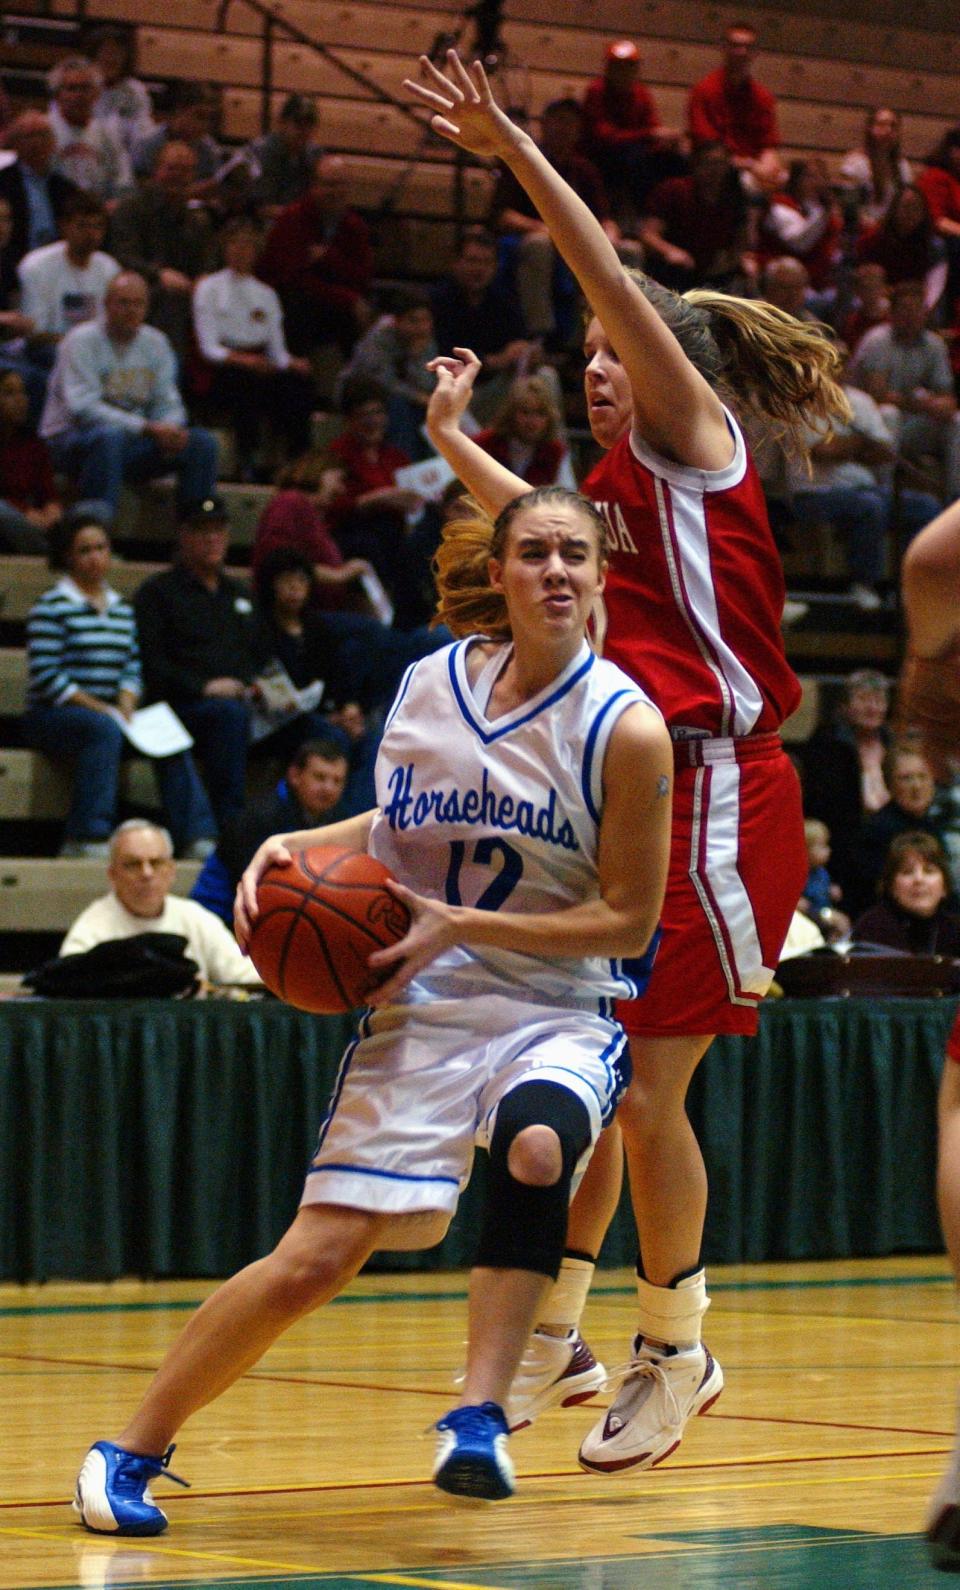 Laura Keating was point guard for the Horseheads girls basketball team that advanced to the Class A state final in 2002.